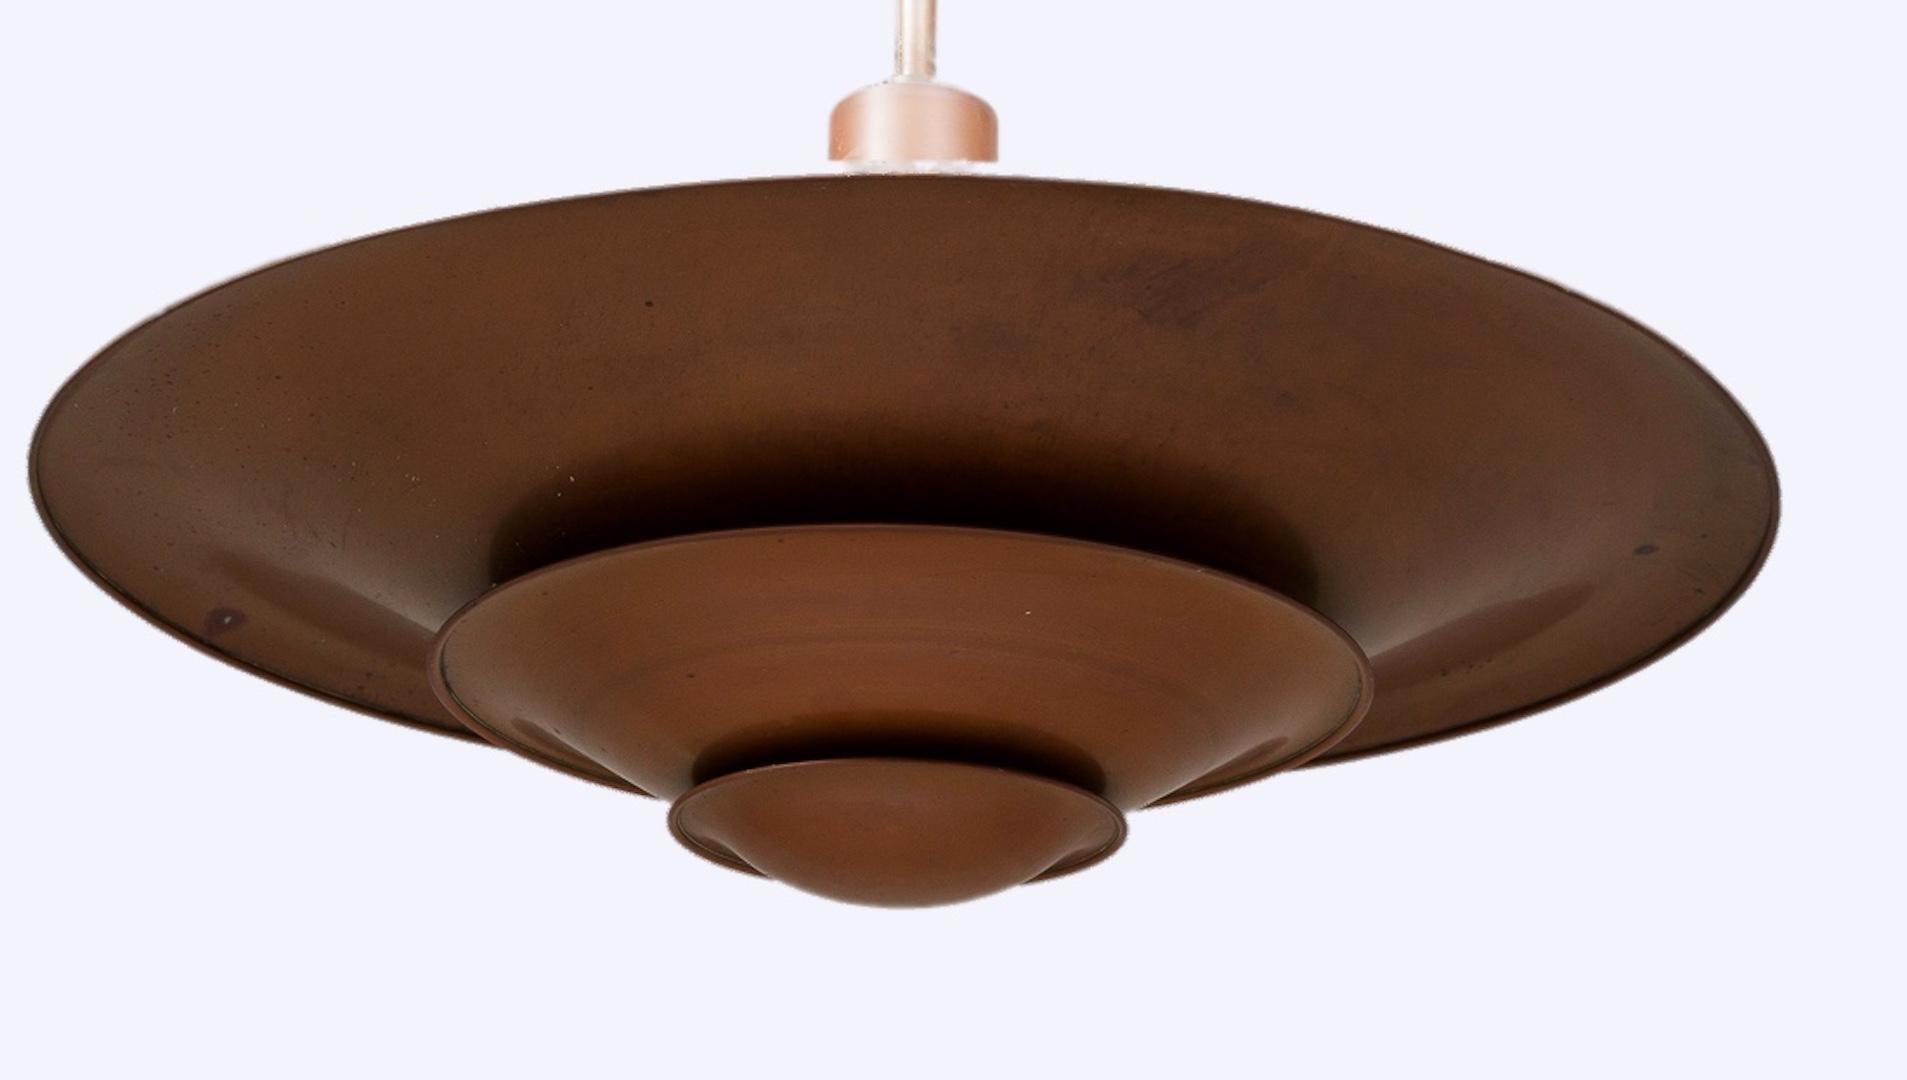 A-lamp - uplight - of copper. Ø 50 cm. Produced by Louis Poulsen in the 1930s. Patinated and with some scratches and marks.
  